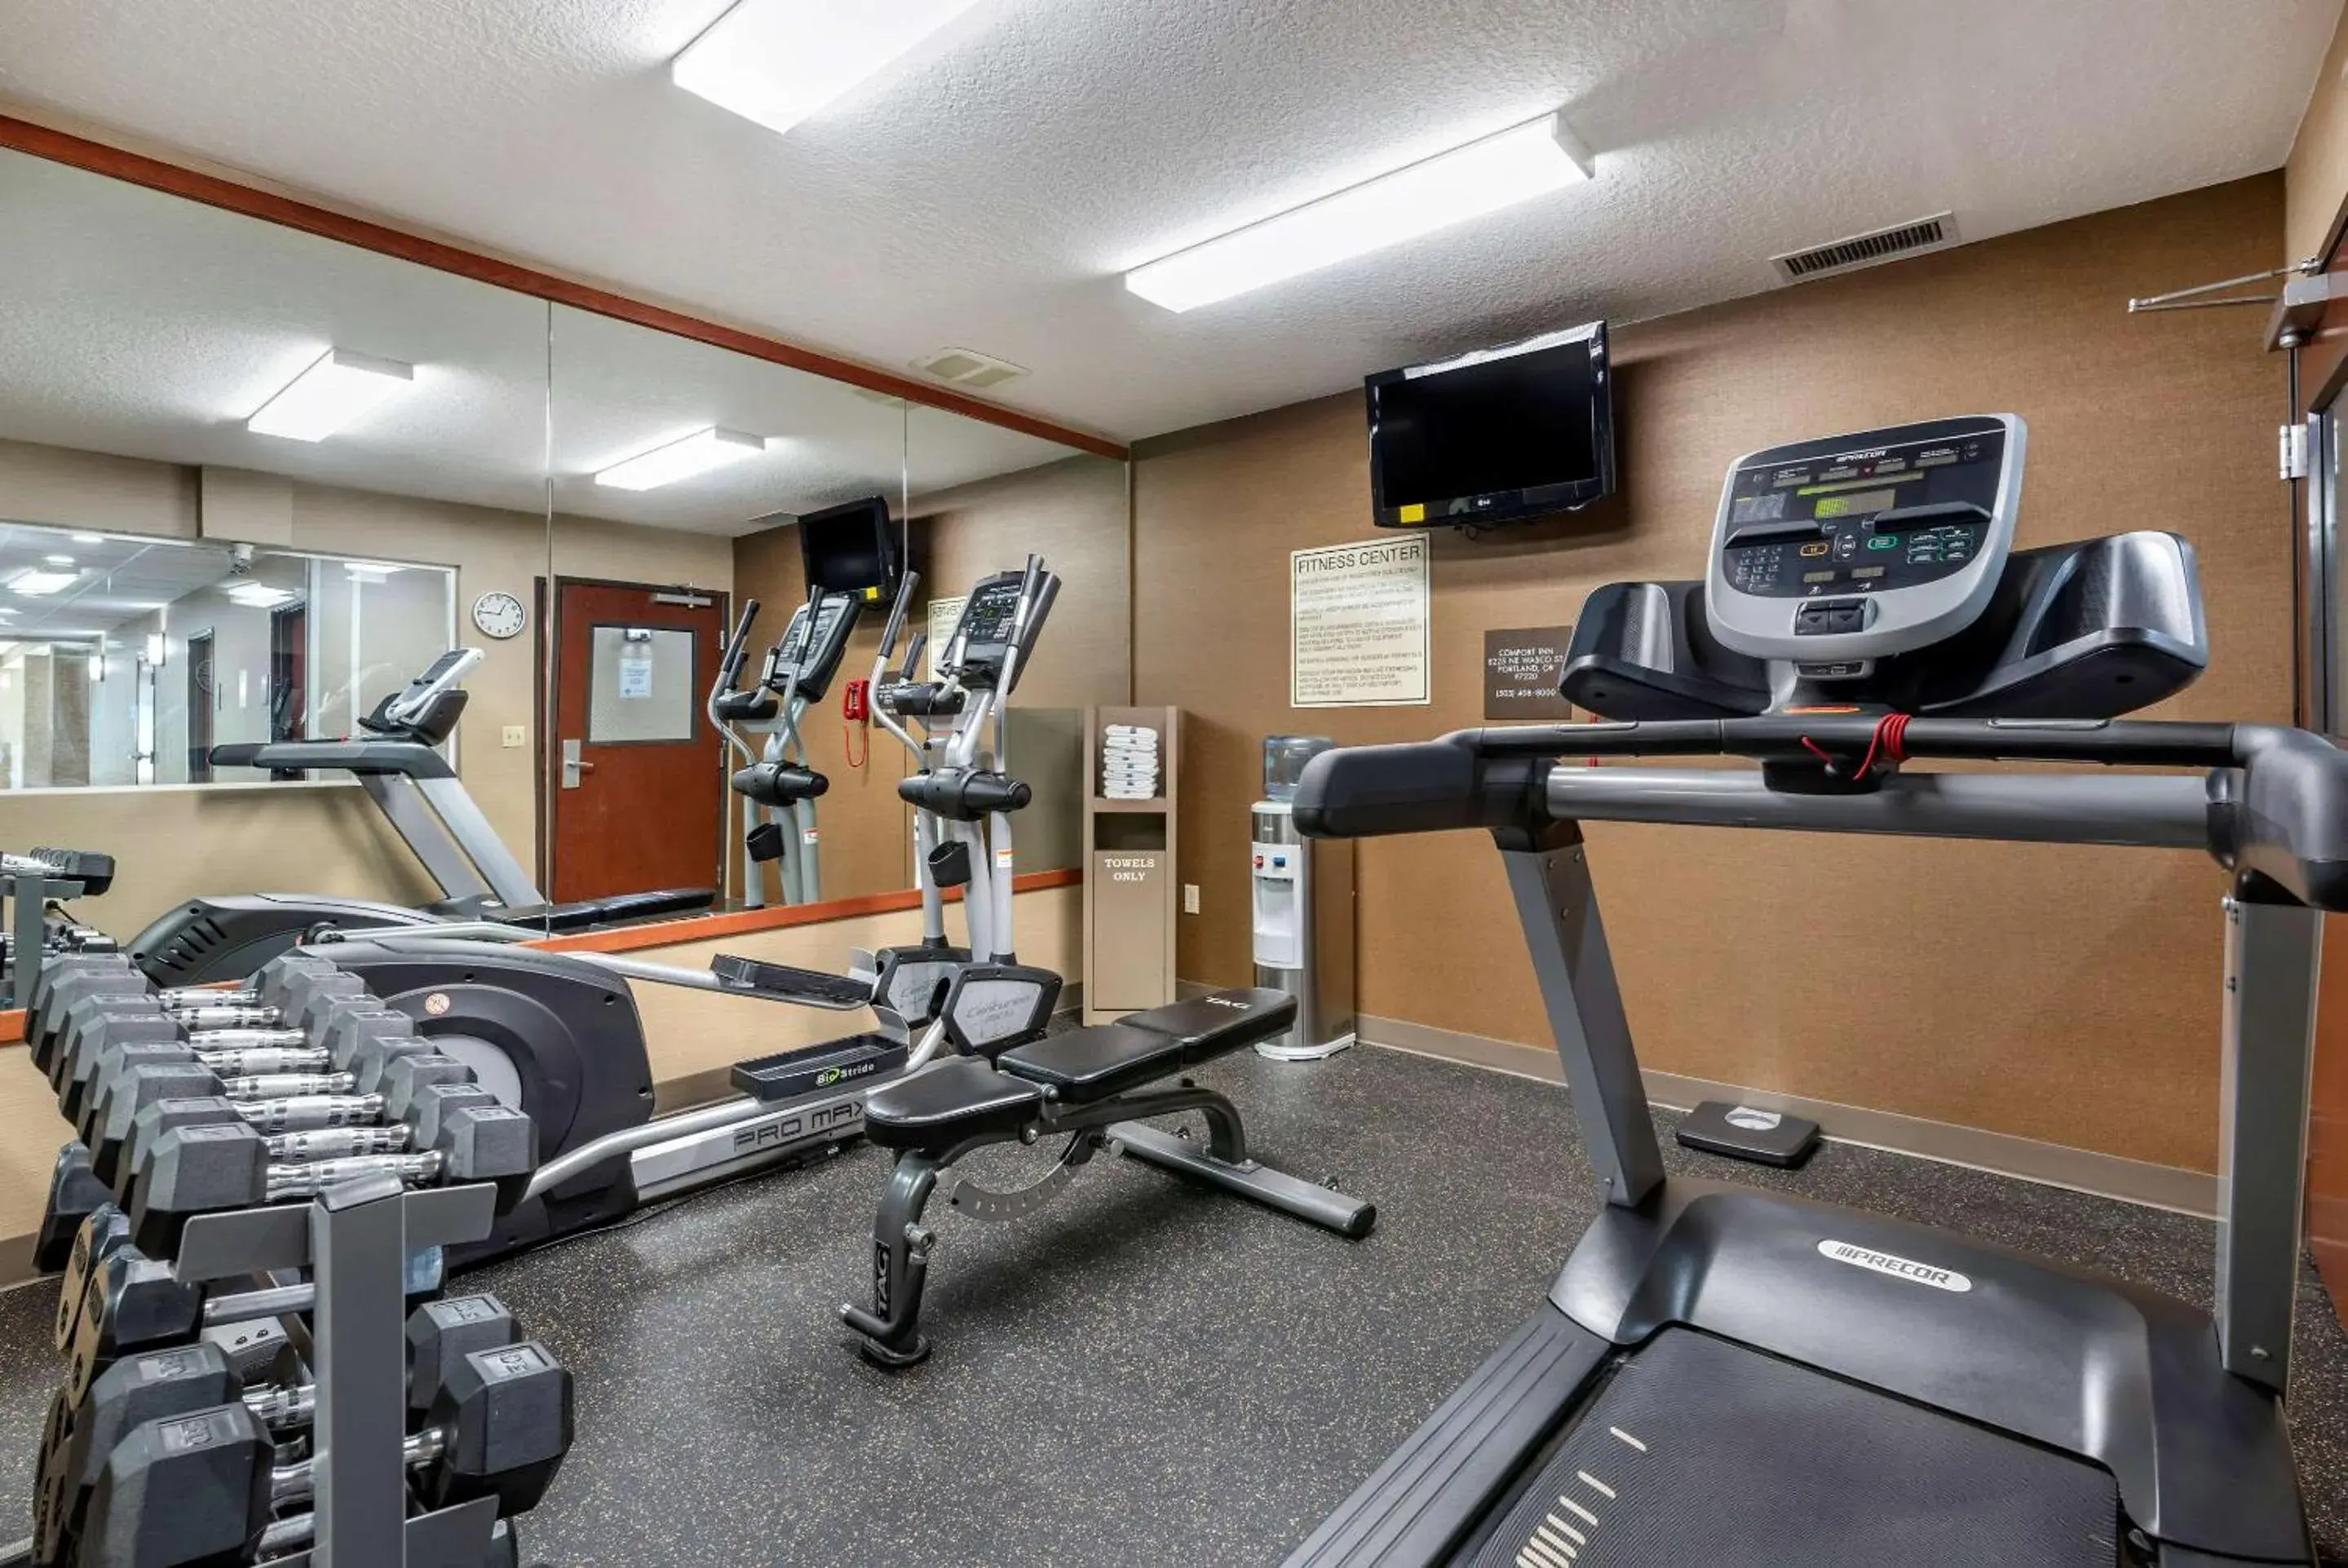 Activities, Fitness Center/Facilities in Comfort Inn Portland near I-84 and I-205